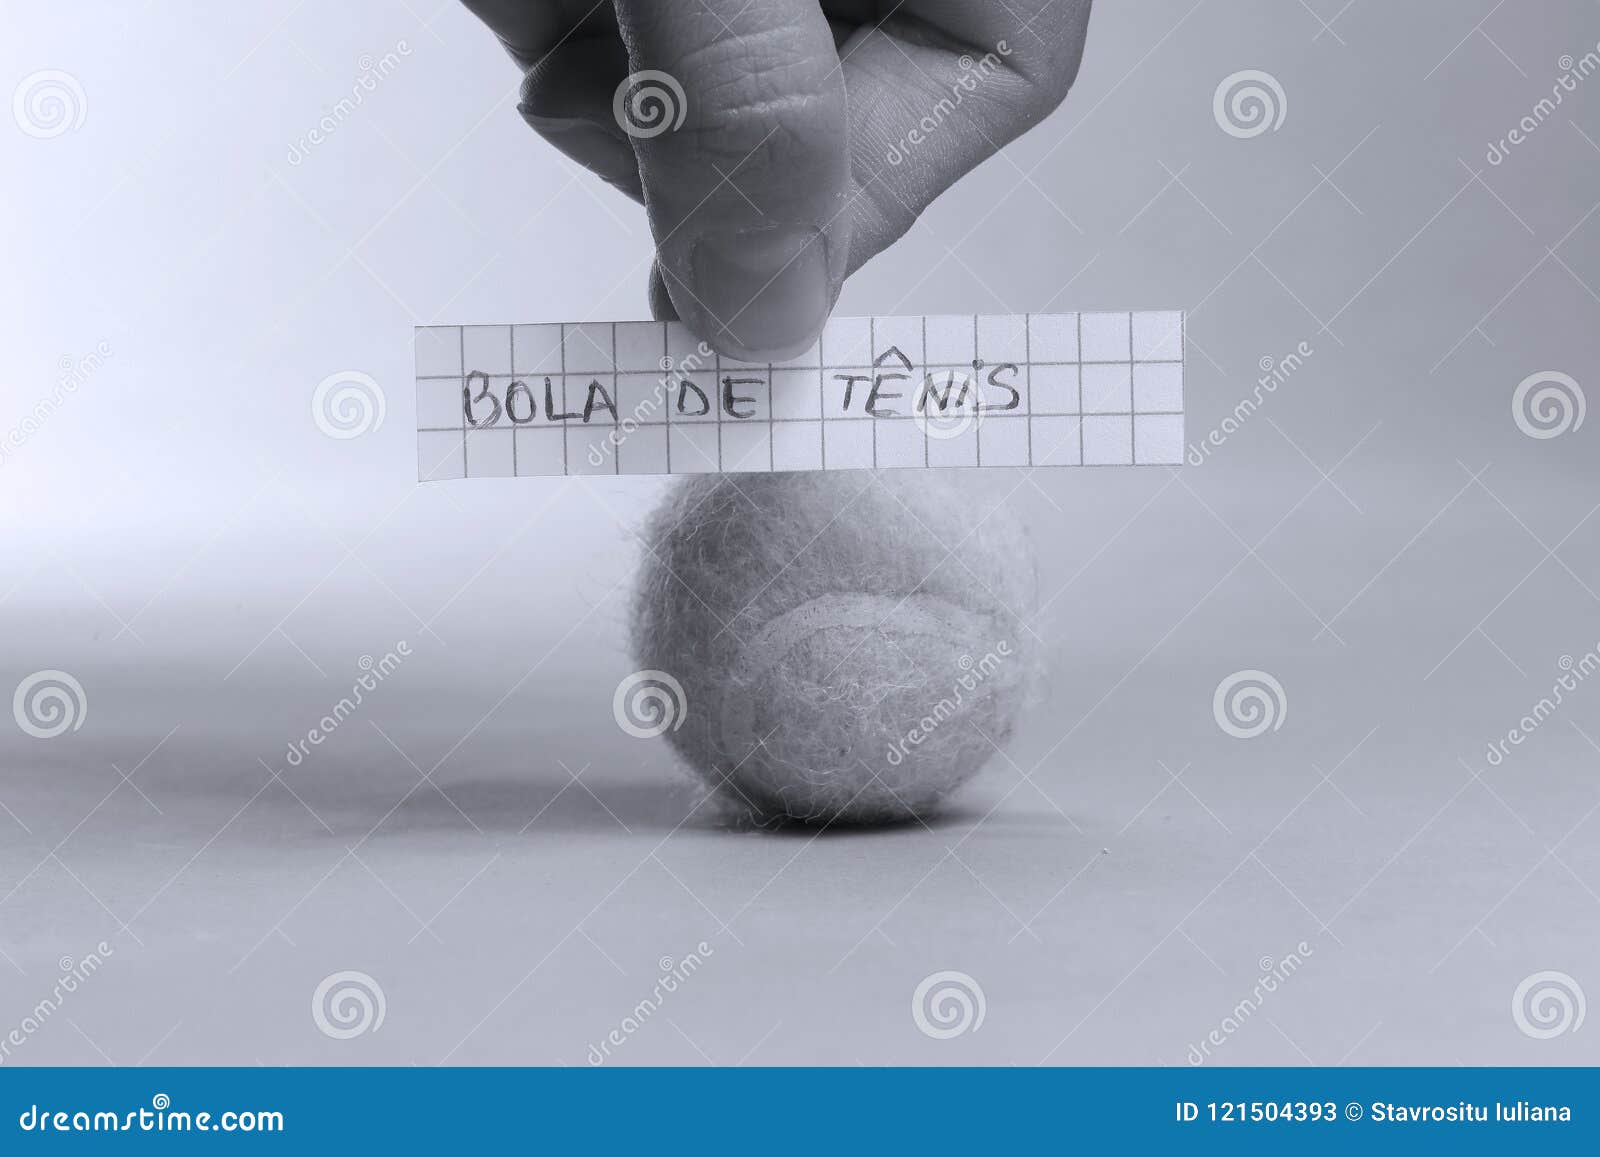 tennis ball word written on a piece of paper, bola de tenis in spanish language